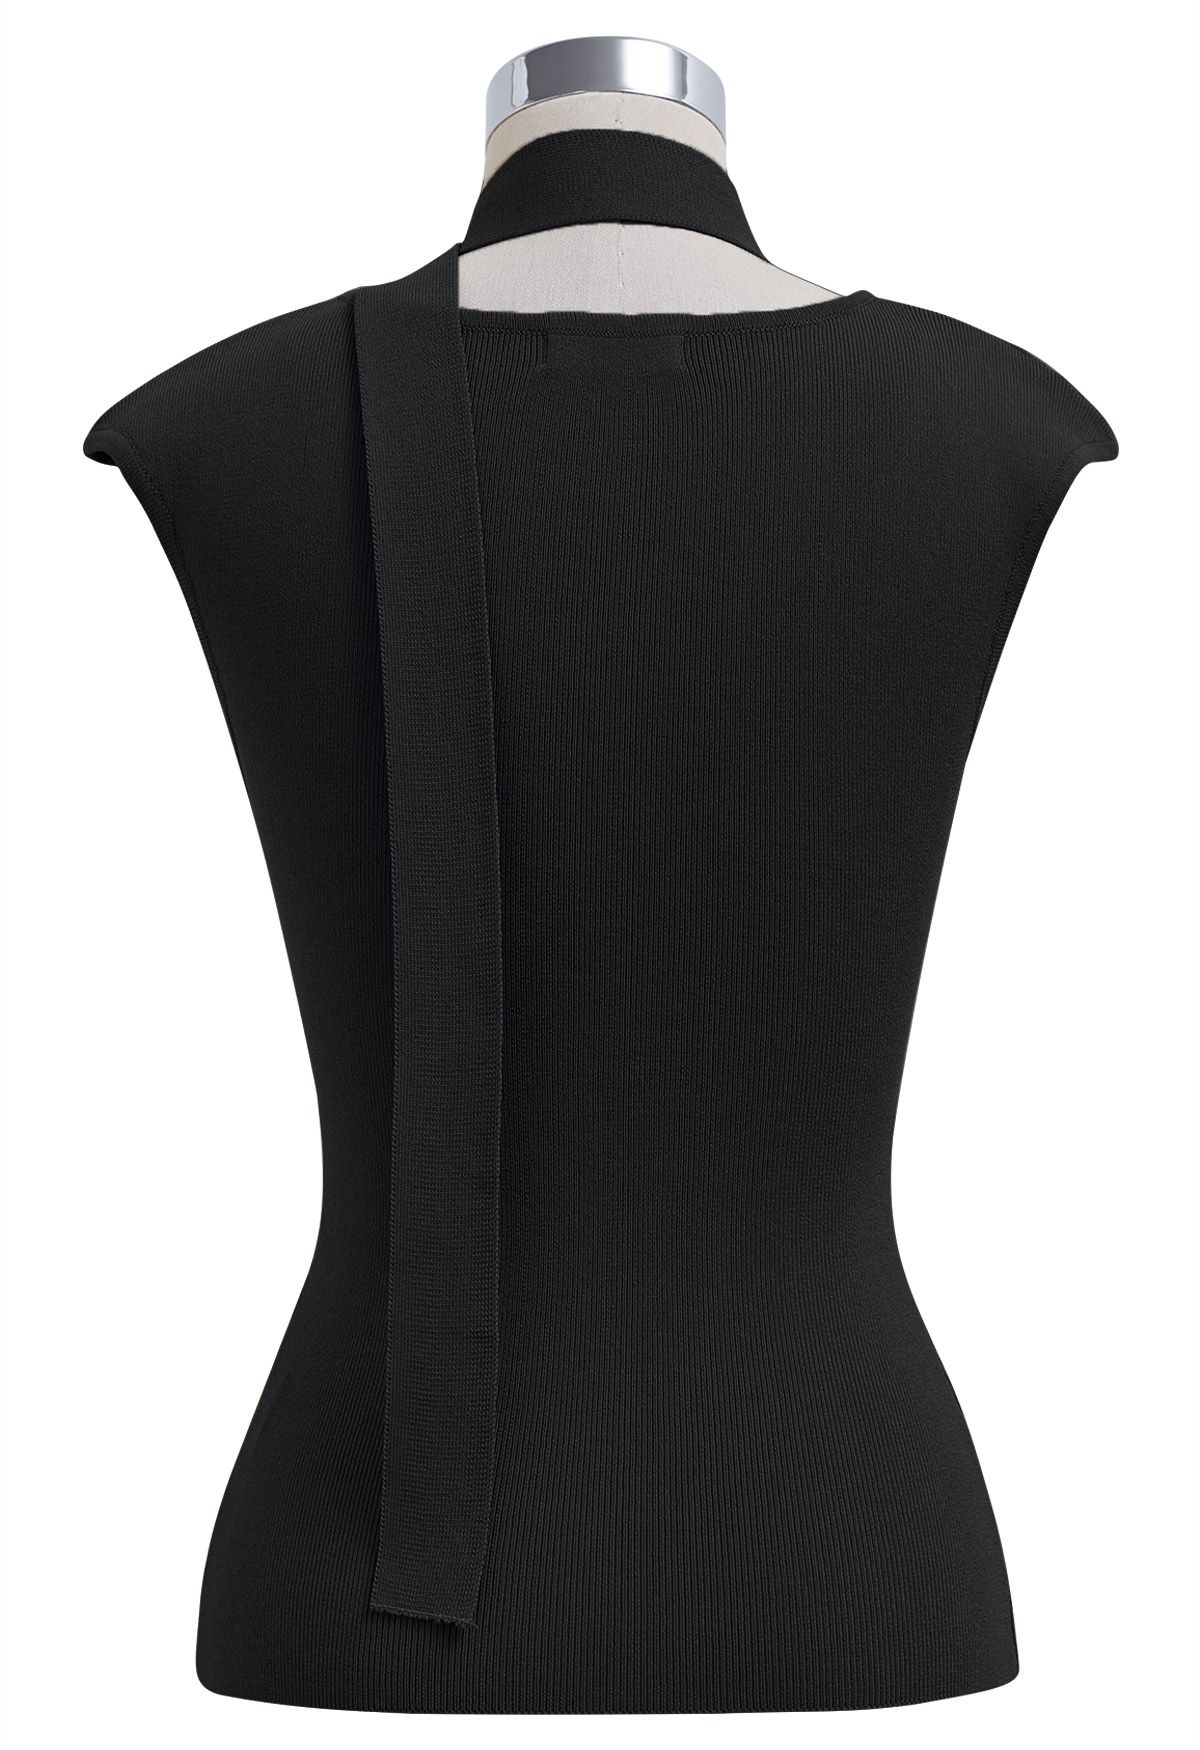 Square Neck Sleeveless Knit Top with Sash in Black